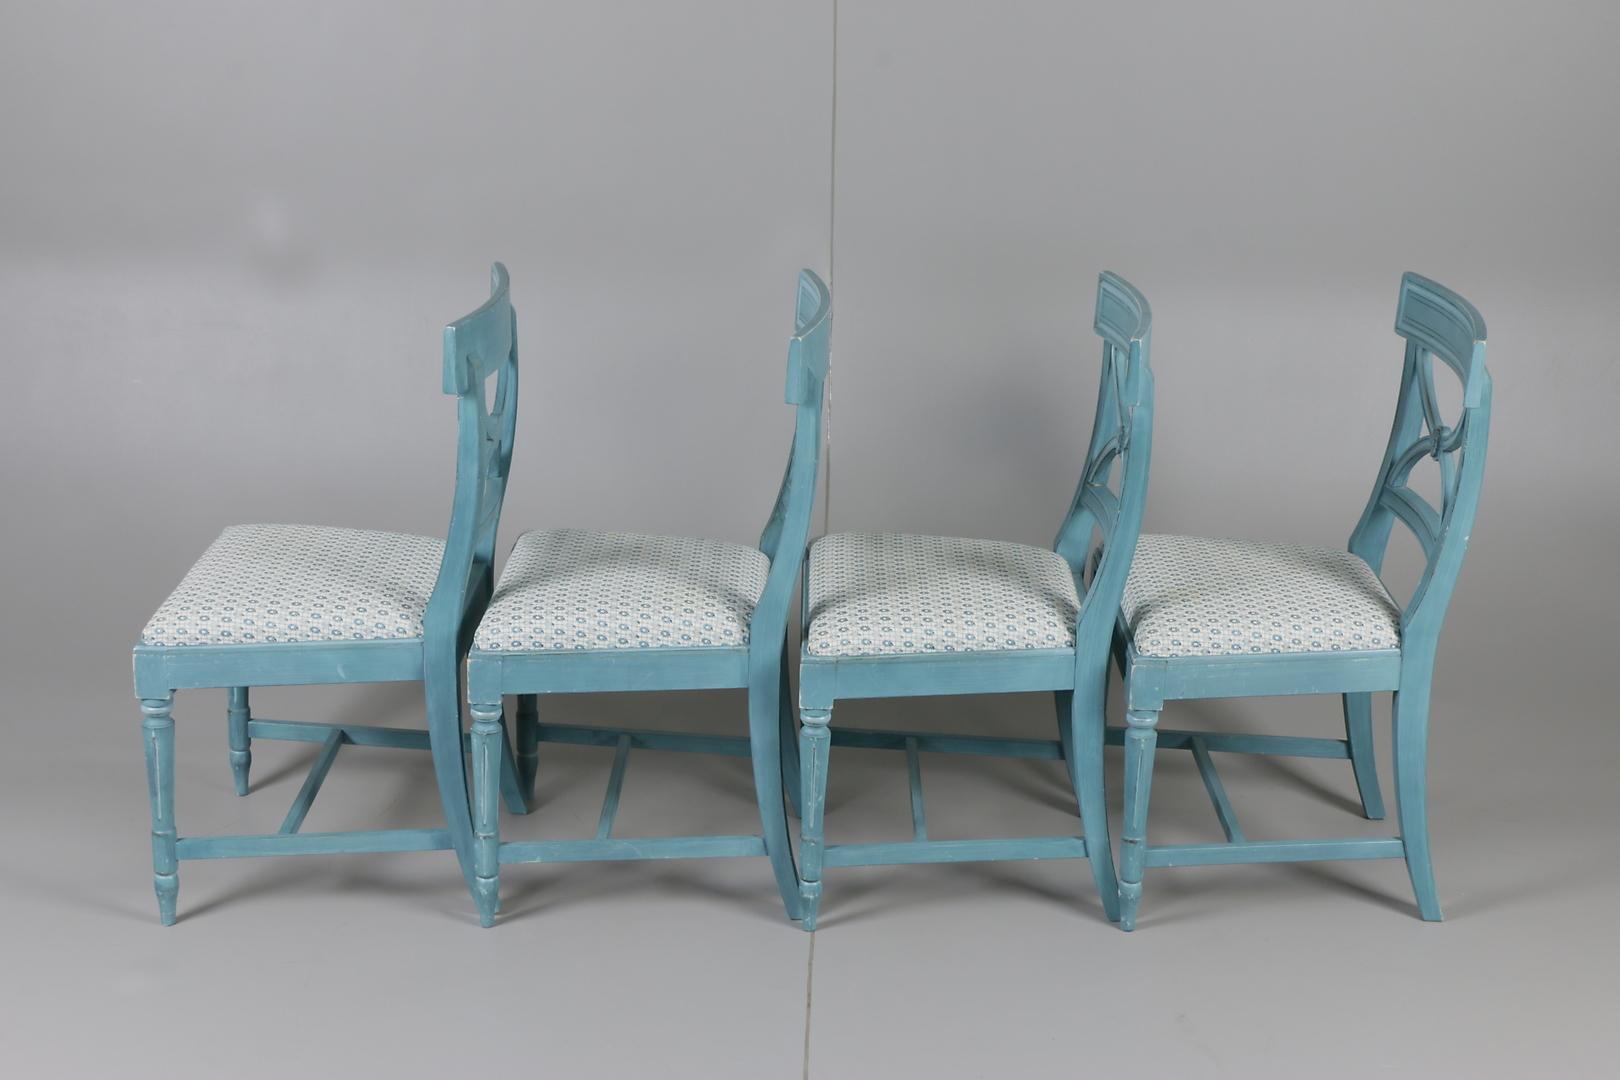 Four chairs in the Bellman style. Hand painted a soft blue, with a removable seat. Lovely, sturdy and easily recovered. Works with Gustavian pieces and at home in a city loft as well as a country home.